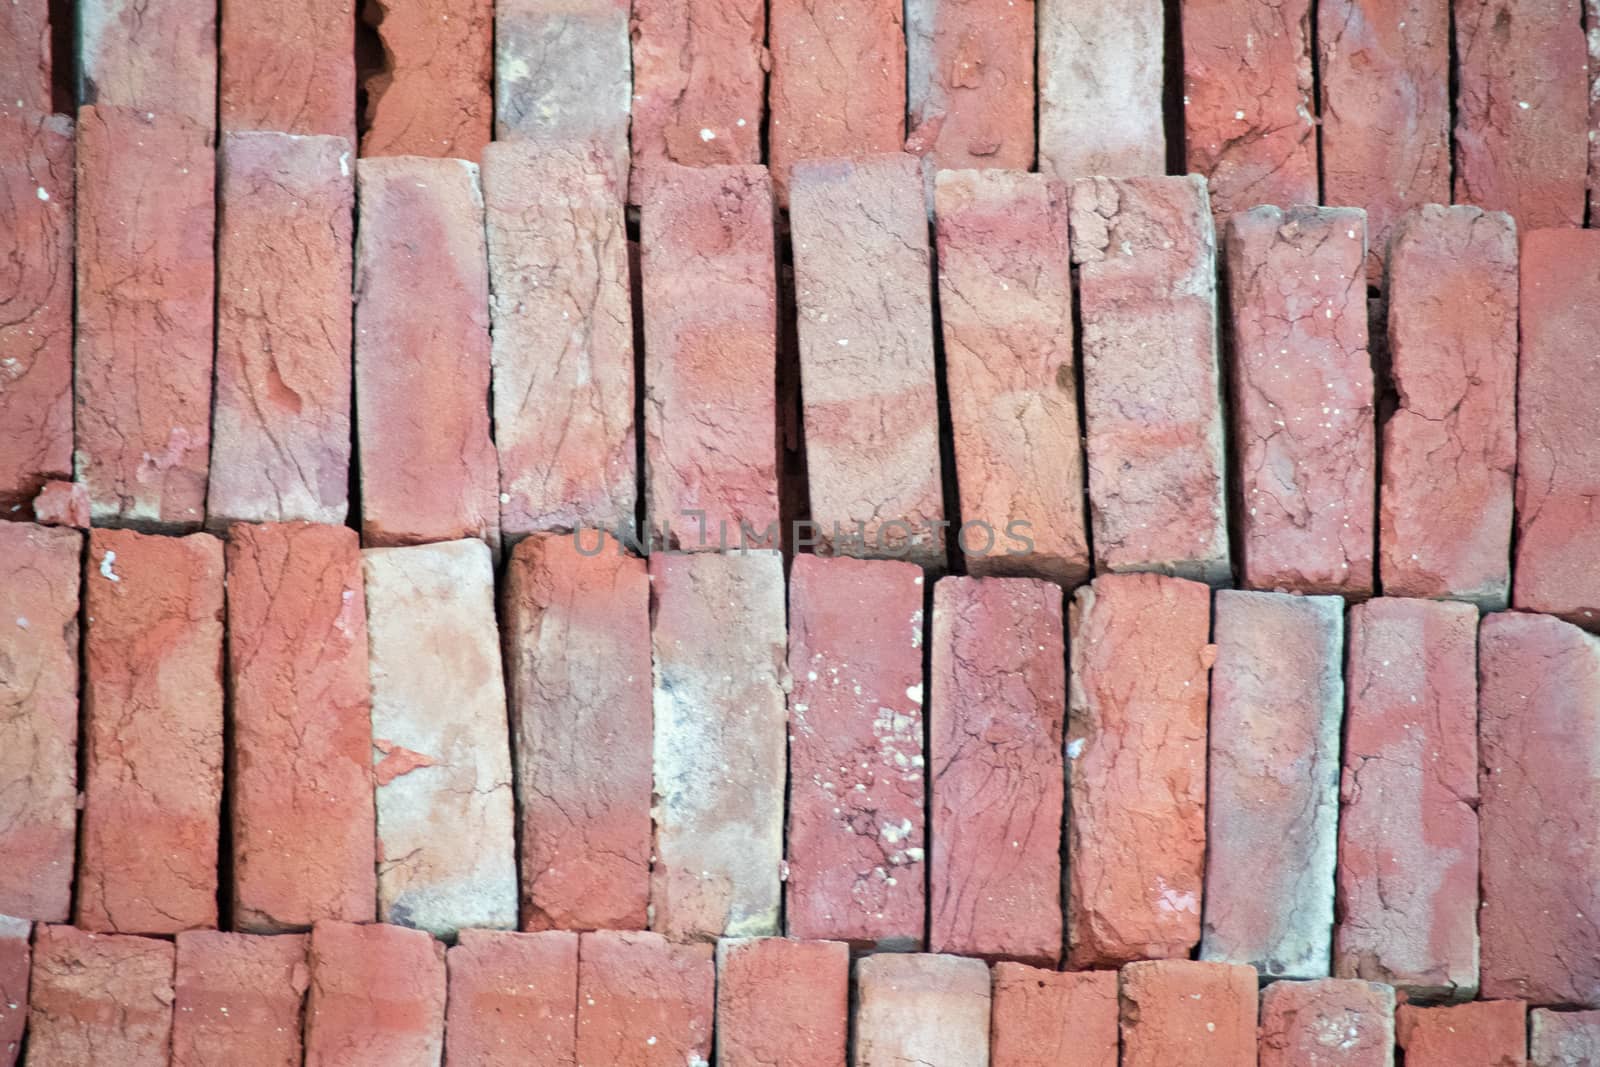 Pile of bricks placed on the ground, showing the pattern and the distinctive red color . Shows the clay klin fired bricks that are used for construction projects across india and are a major industry